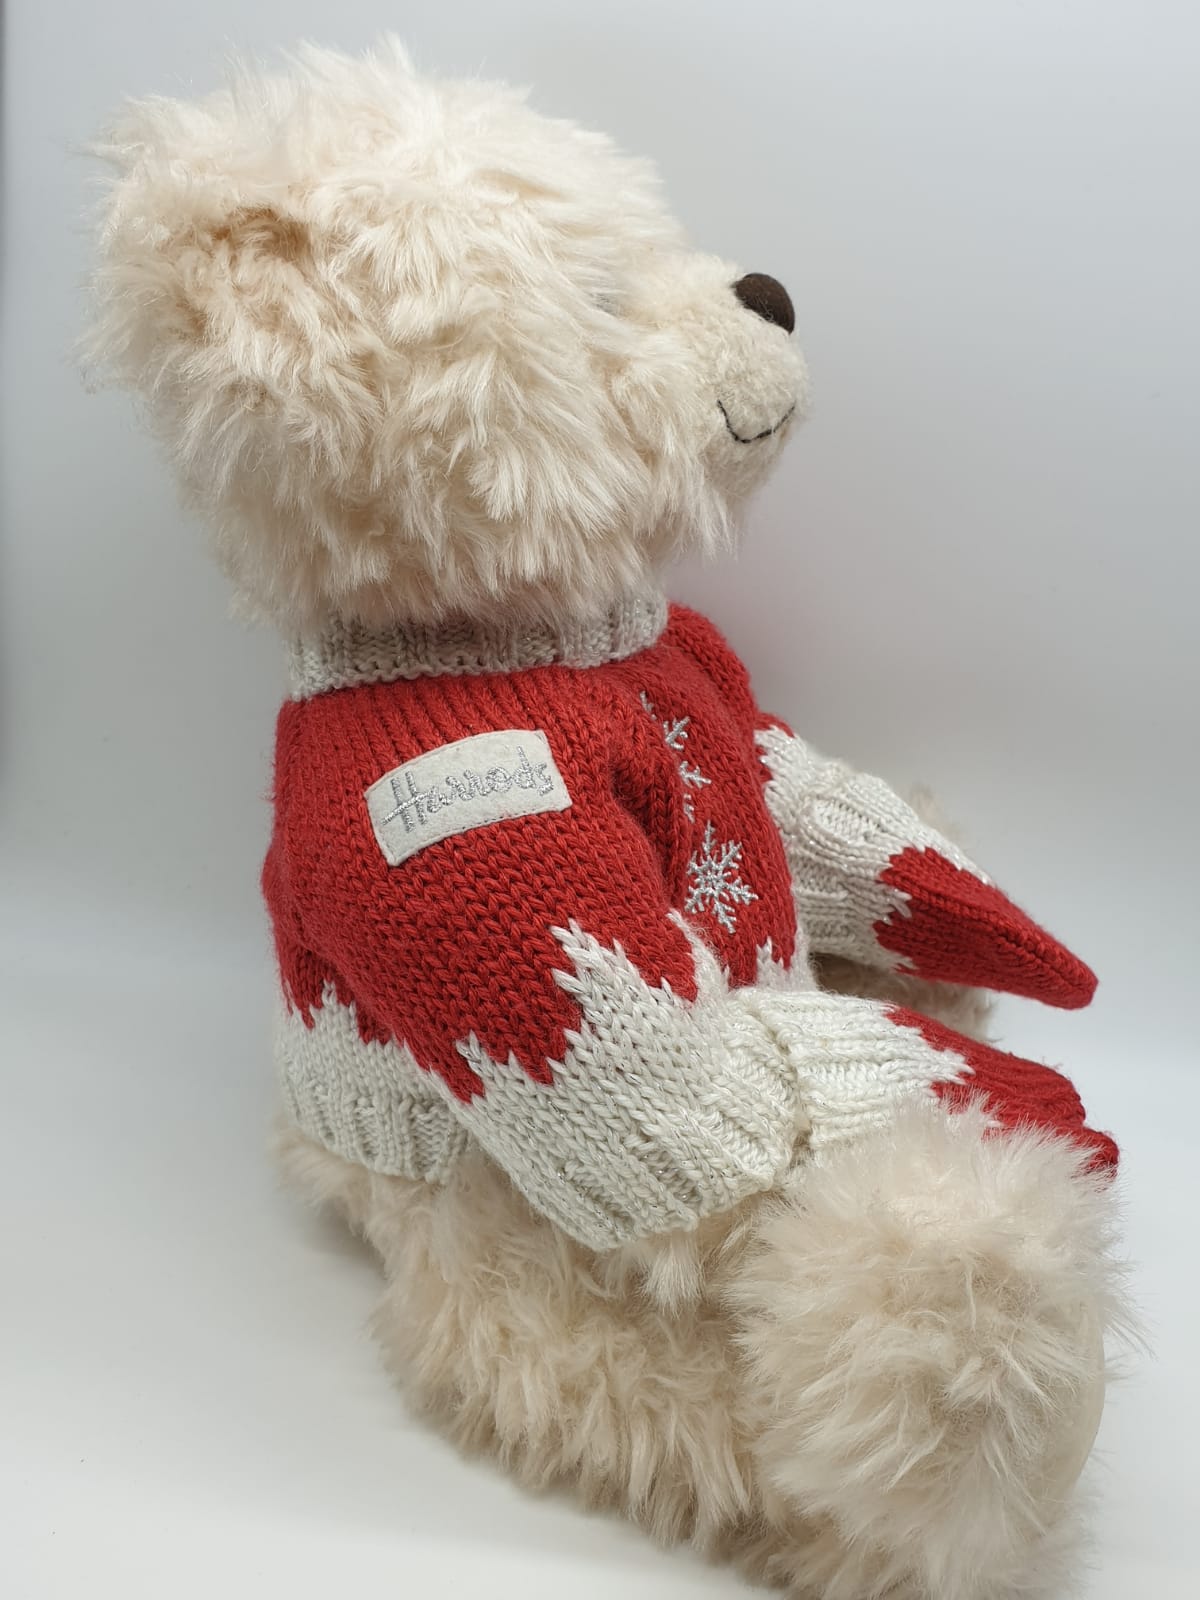 2 Harrods Teddy Bears 2001&2008 approx 40cms, very collectible - Image 15 of 21